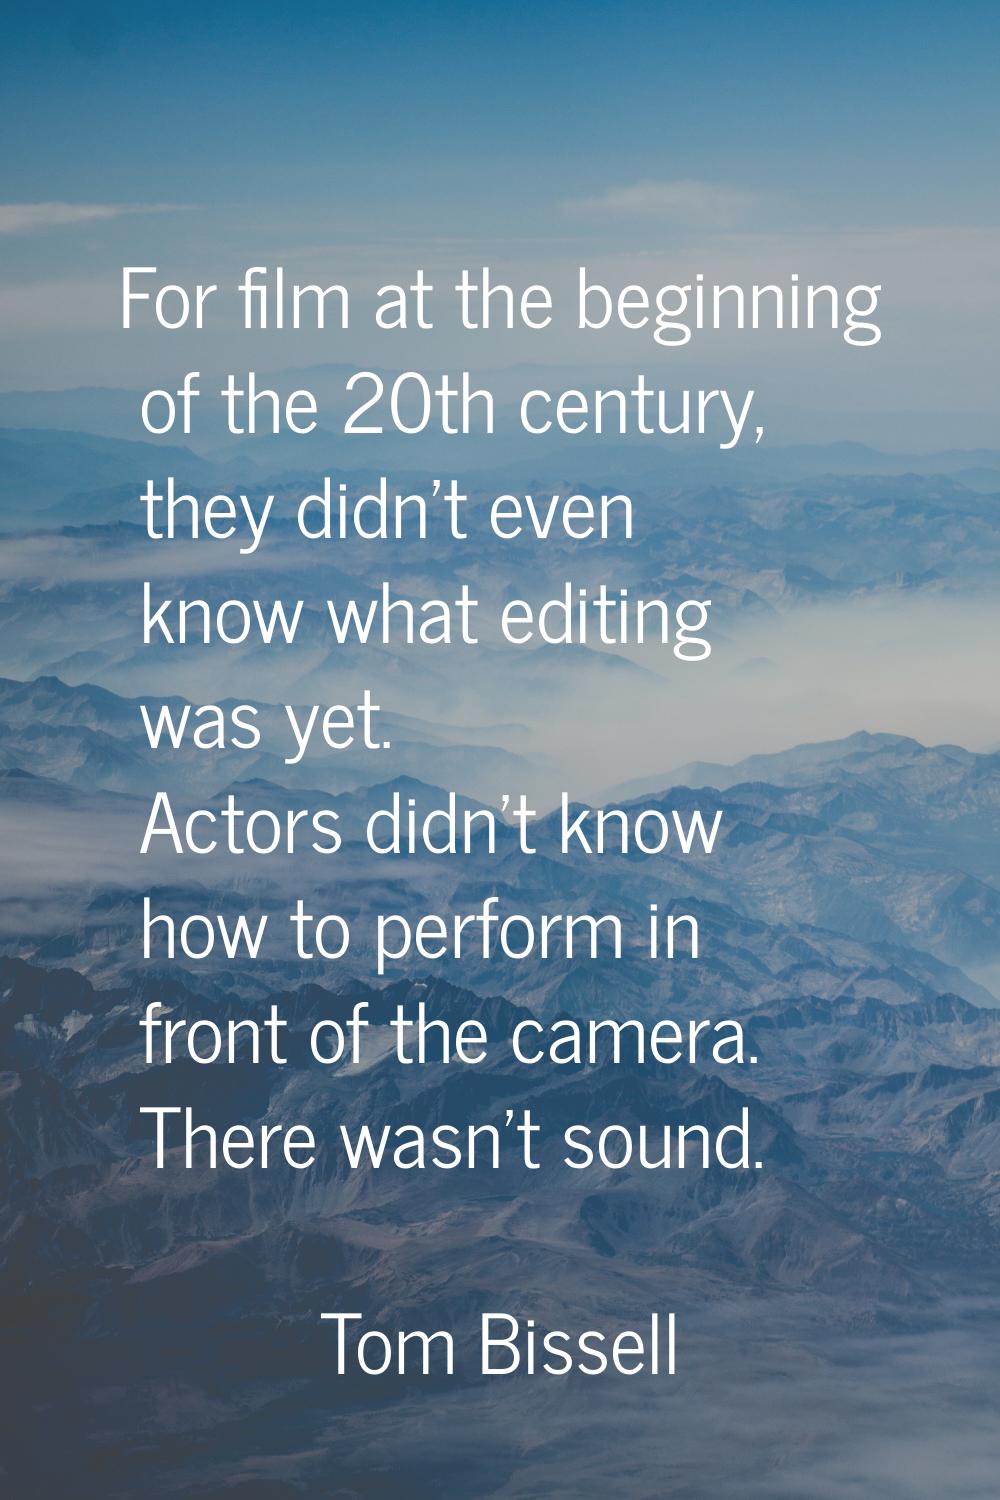 For film at the beginning of the 20th century, they didn't even know what editing was yet. Actors d